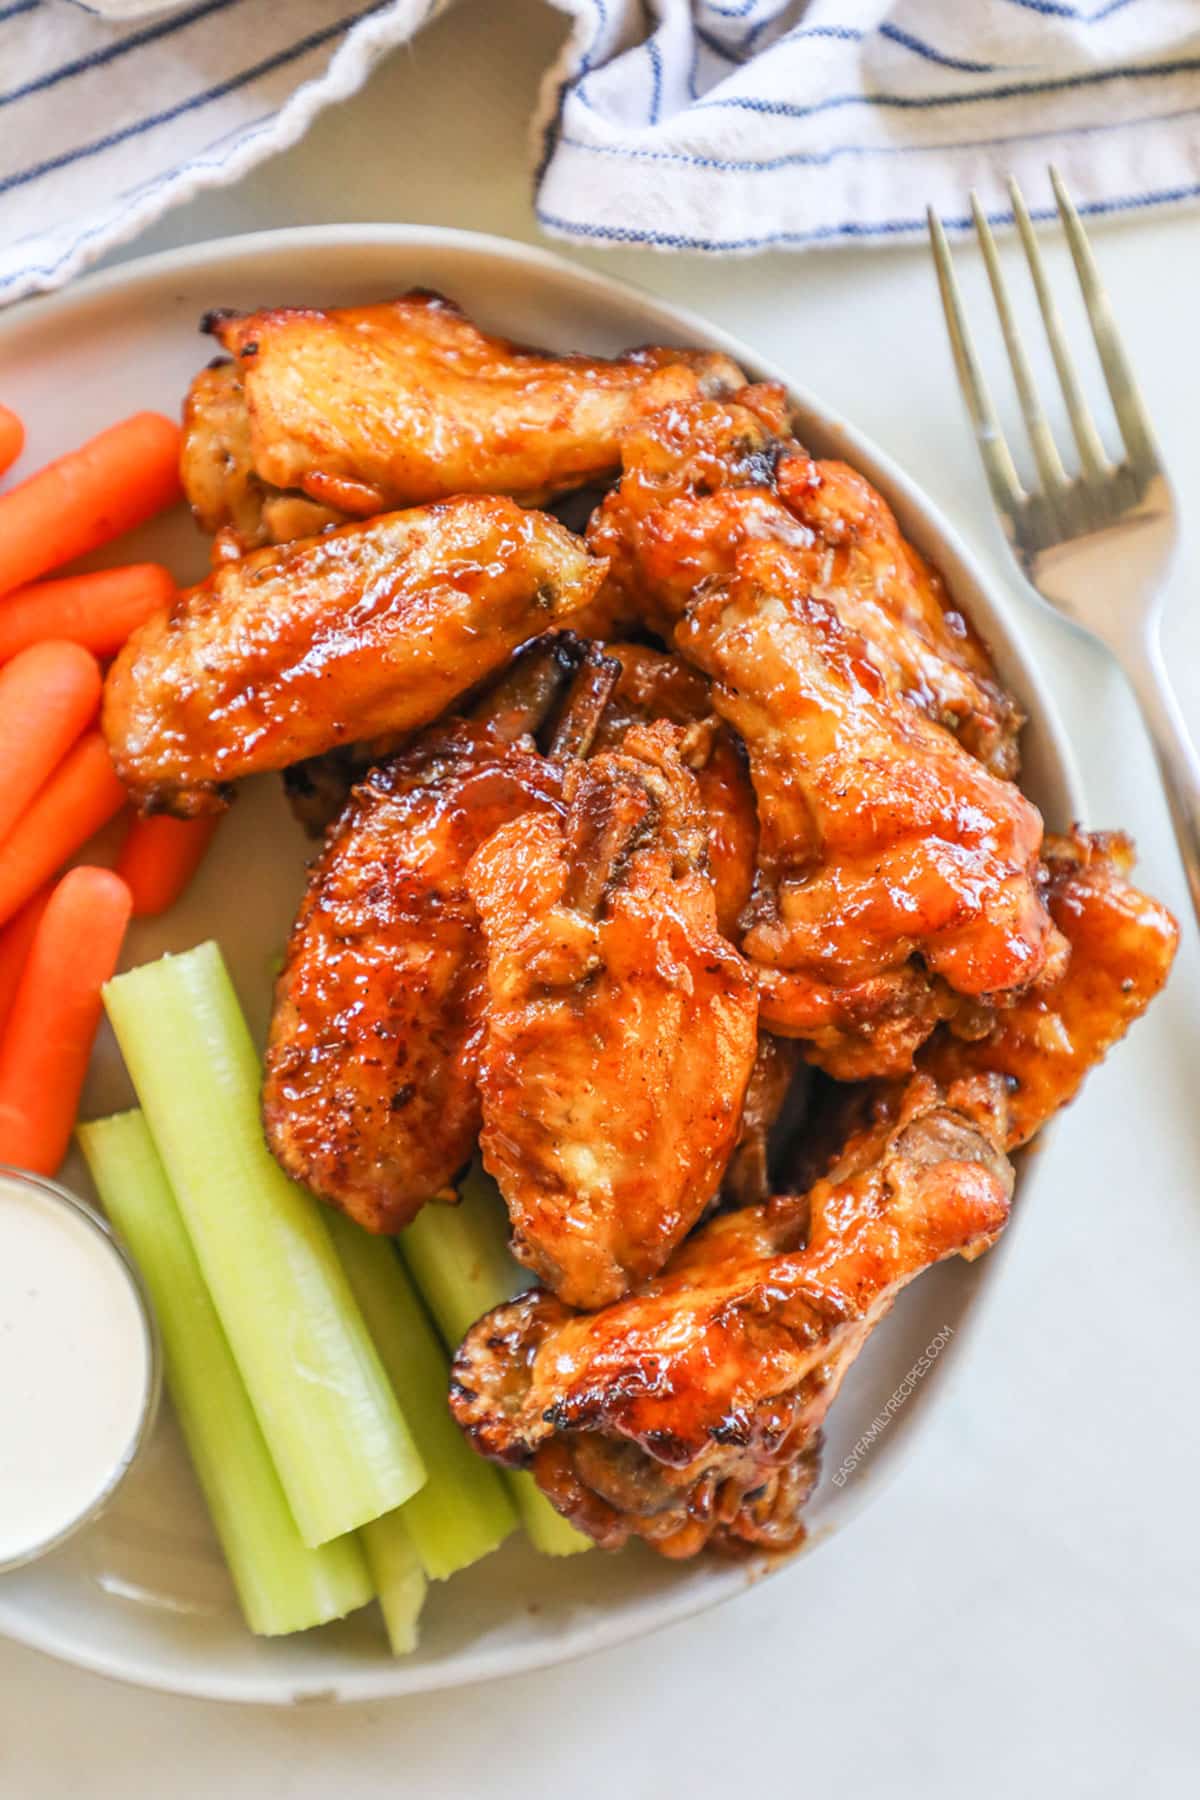 Honey BBQ chicken wings are served on a white plate alongside baby carrots, celery, and ranch dip. A fork and blue and white striped napkin are adjacent. 